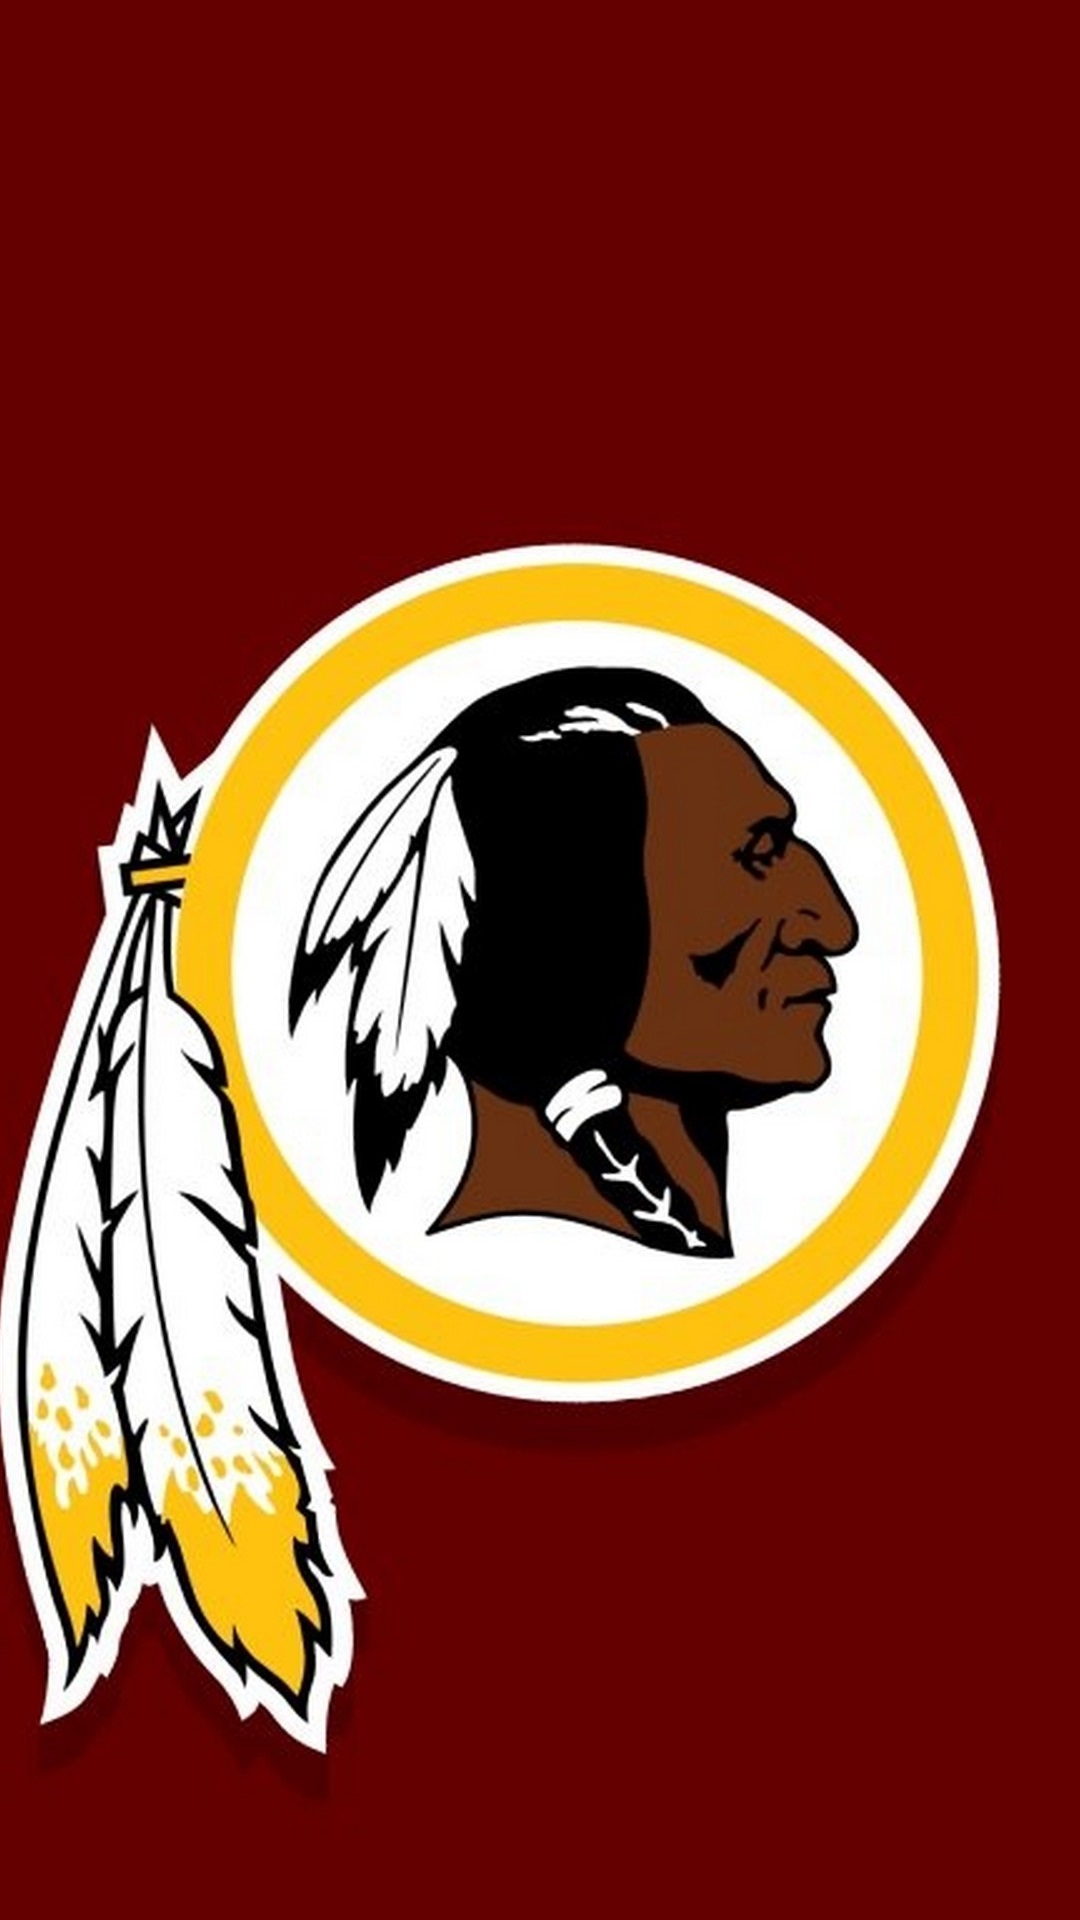 Washington Redskins HD Wallpaper For iPhone With high-resolution 1080X1920 pixel. You can use this wallpaper for your Mac or Windows Desktop Background, iPhone, Android or Tablet and another Smartphone device